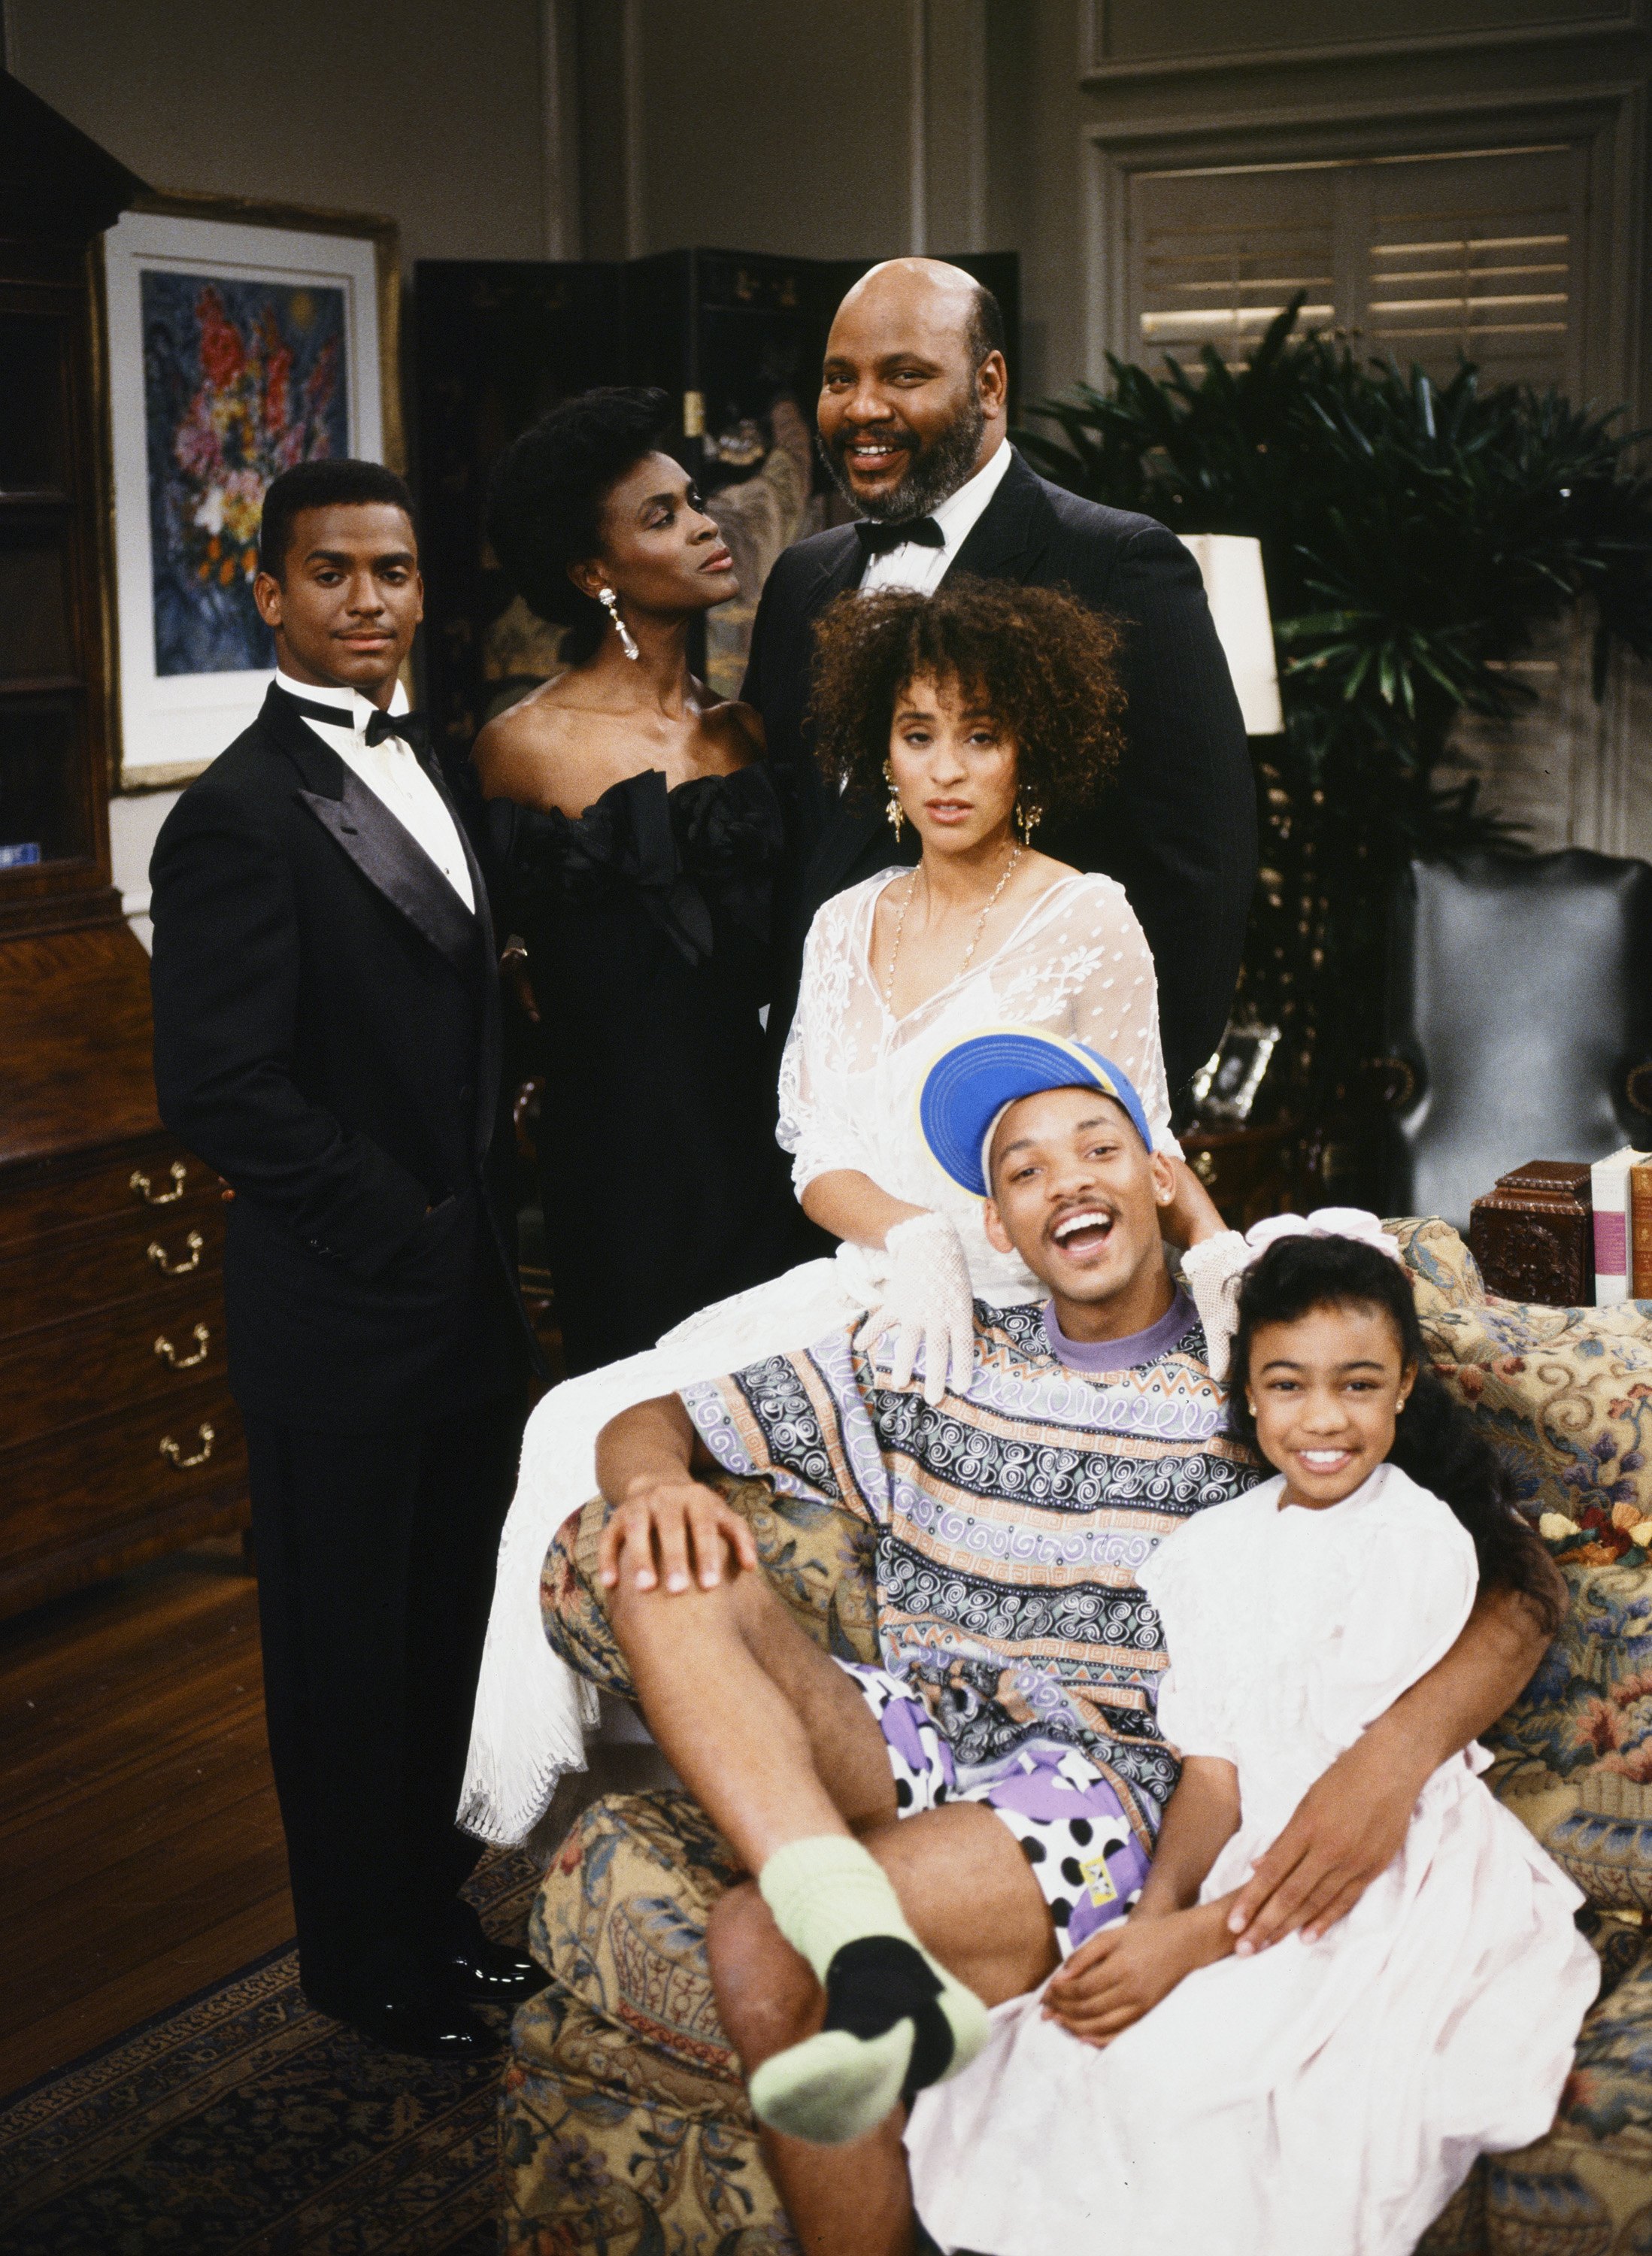 Karyn starred in the Fresh Prince of Bel Air in the 90s